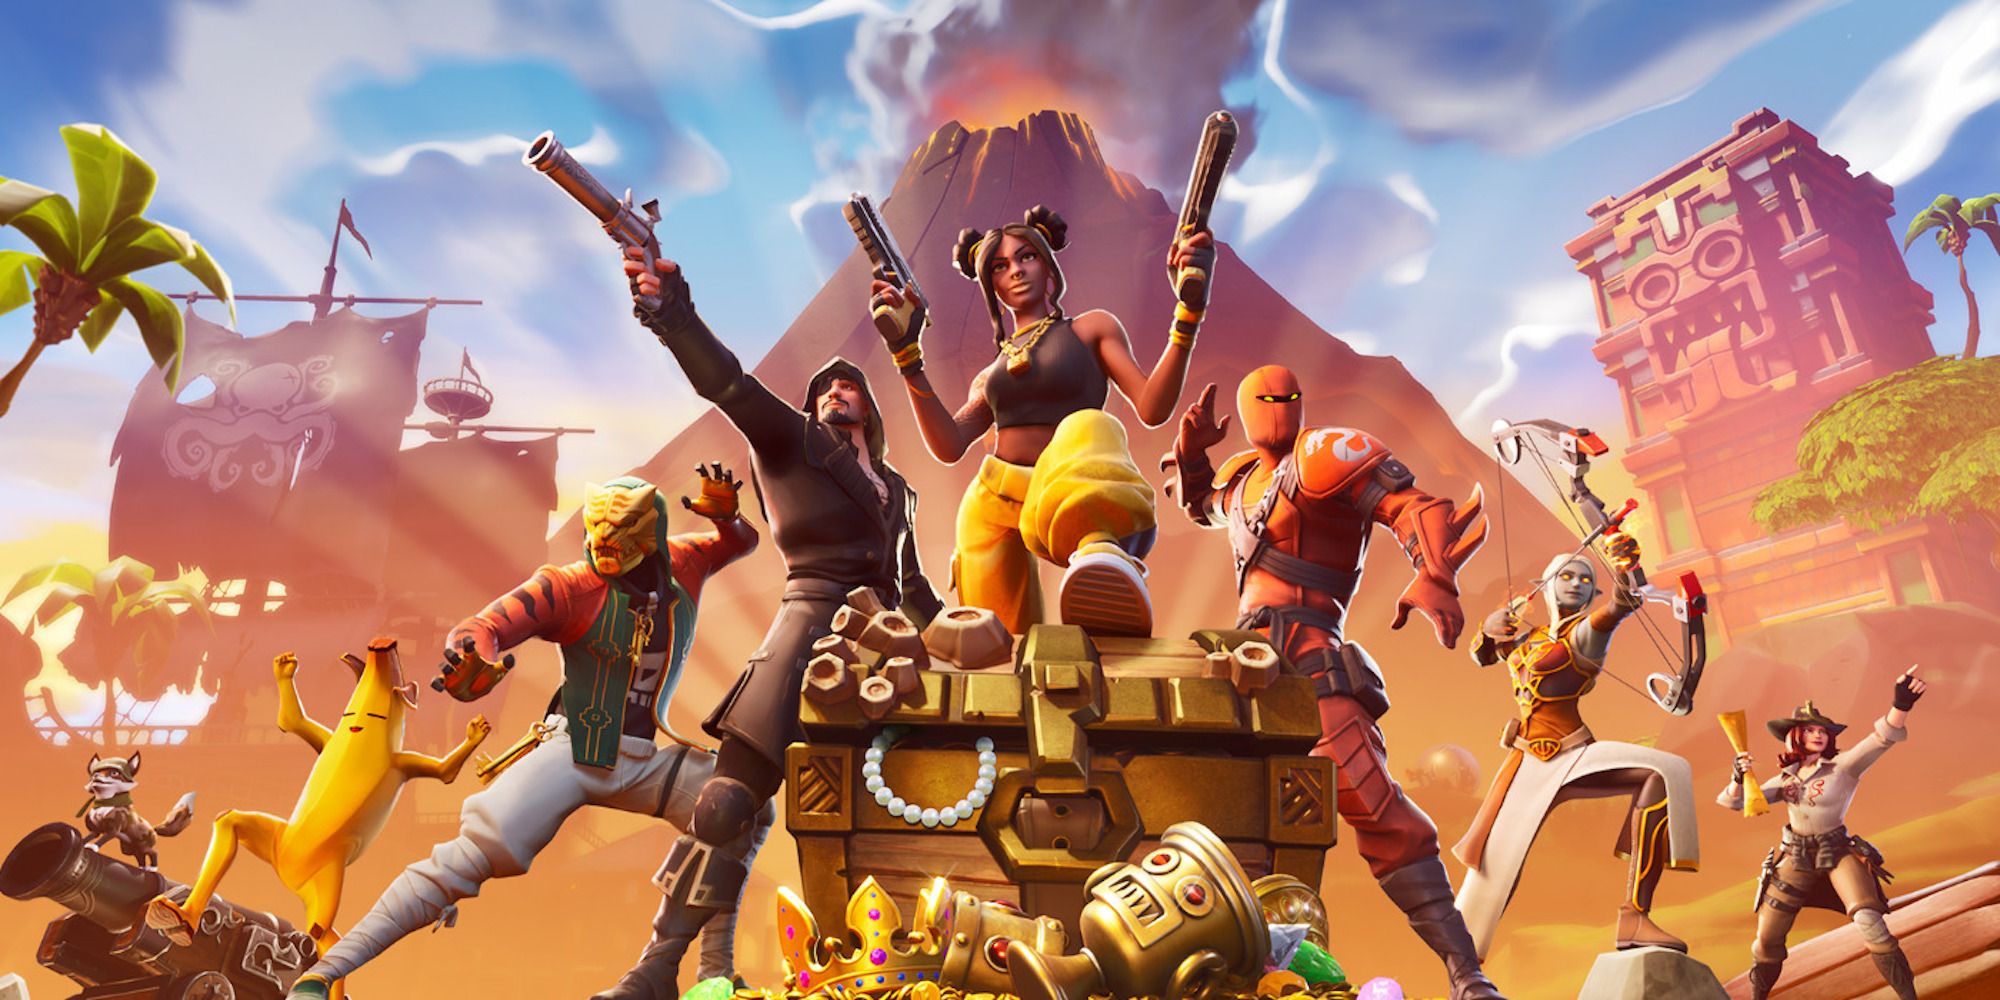 Promo art featuring characters from Fortnite